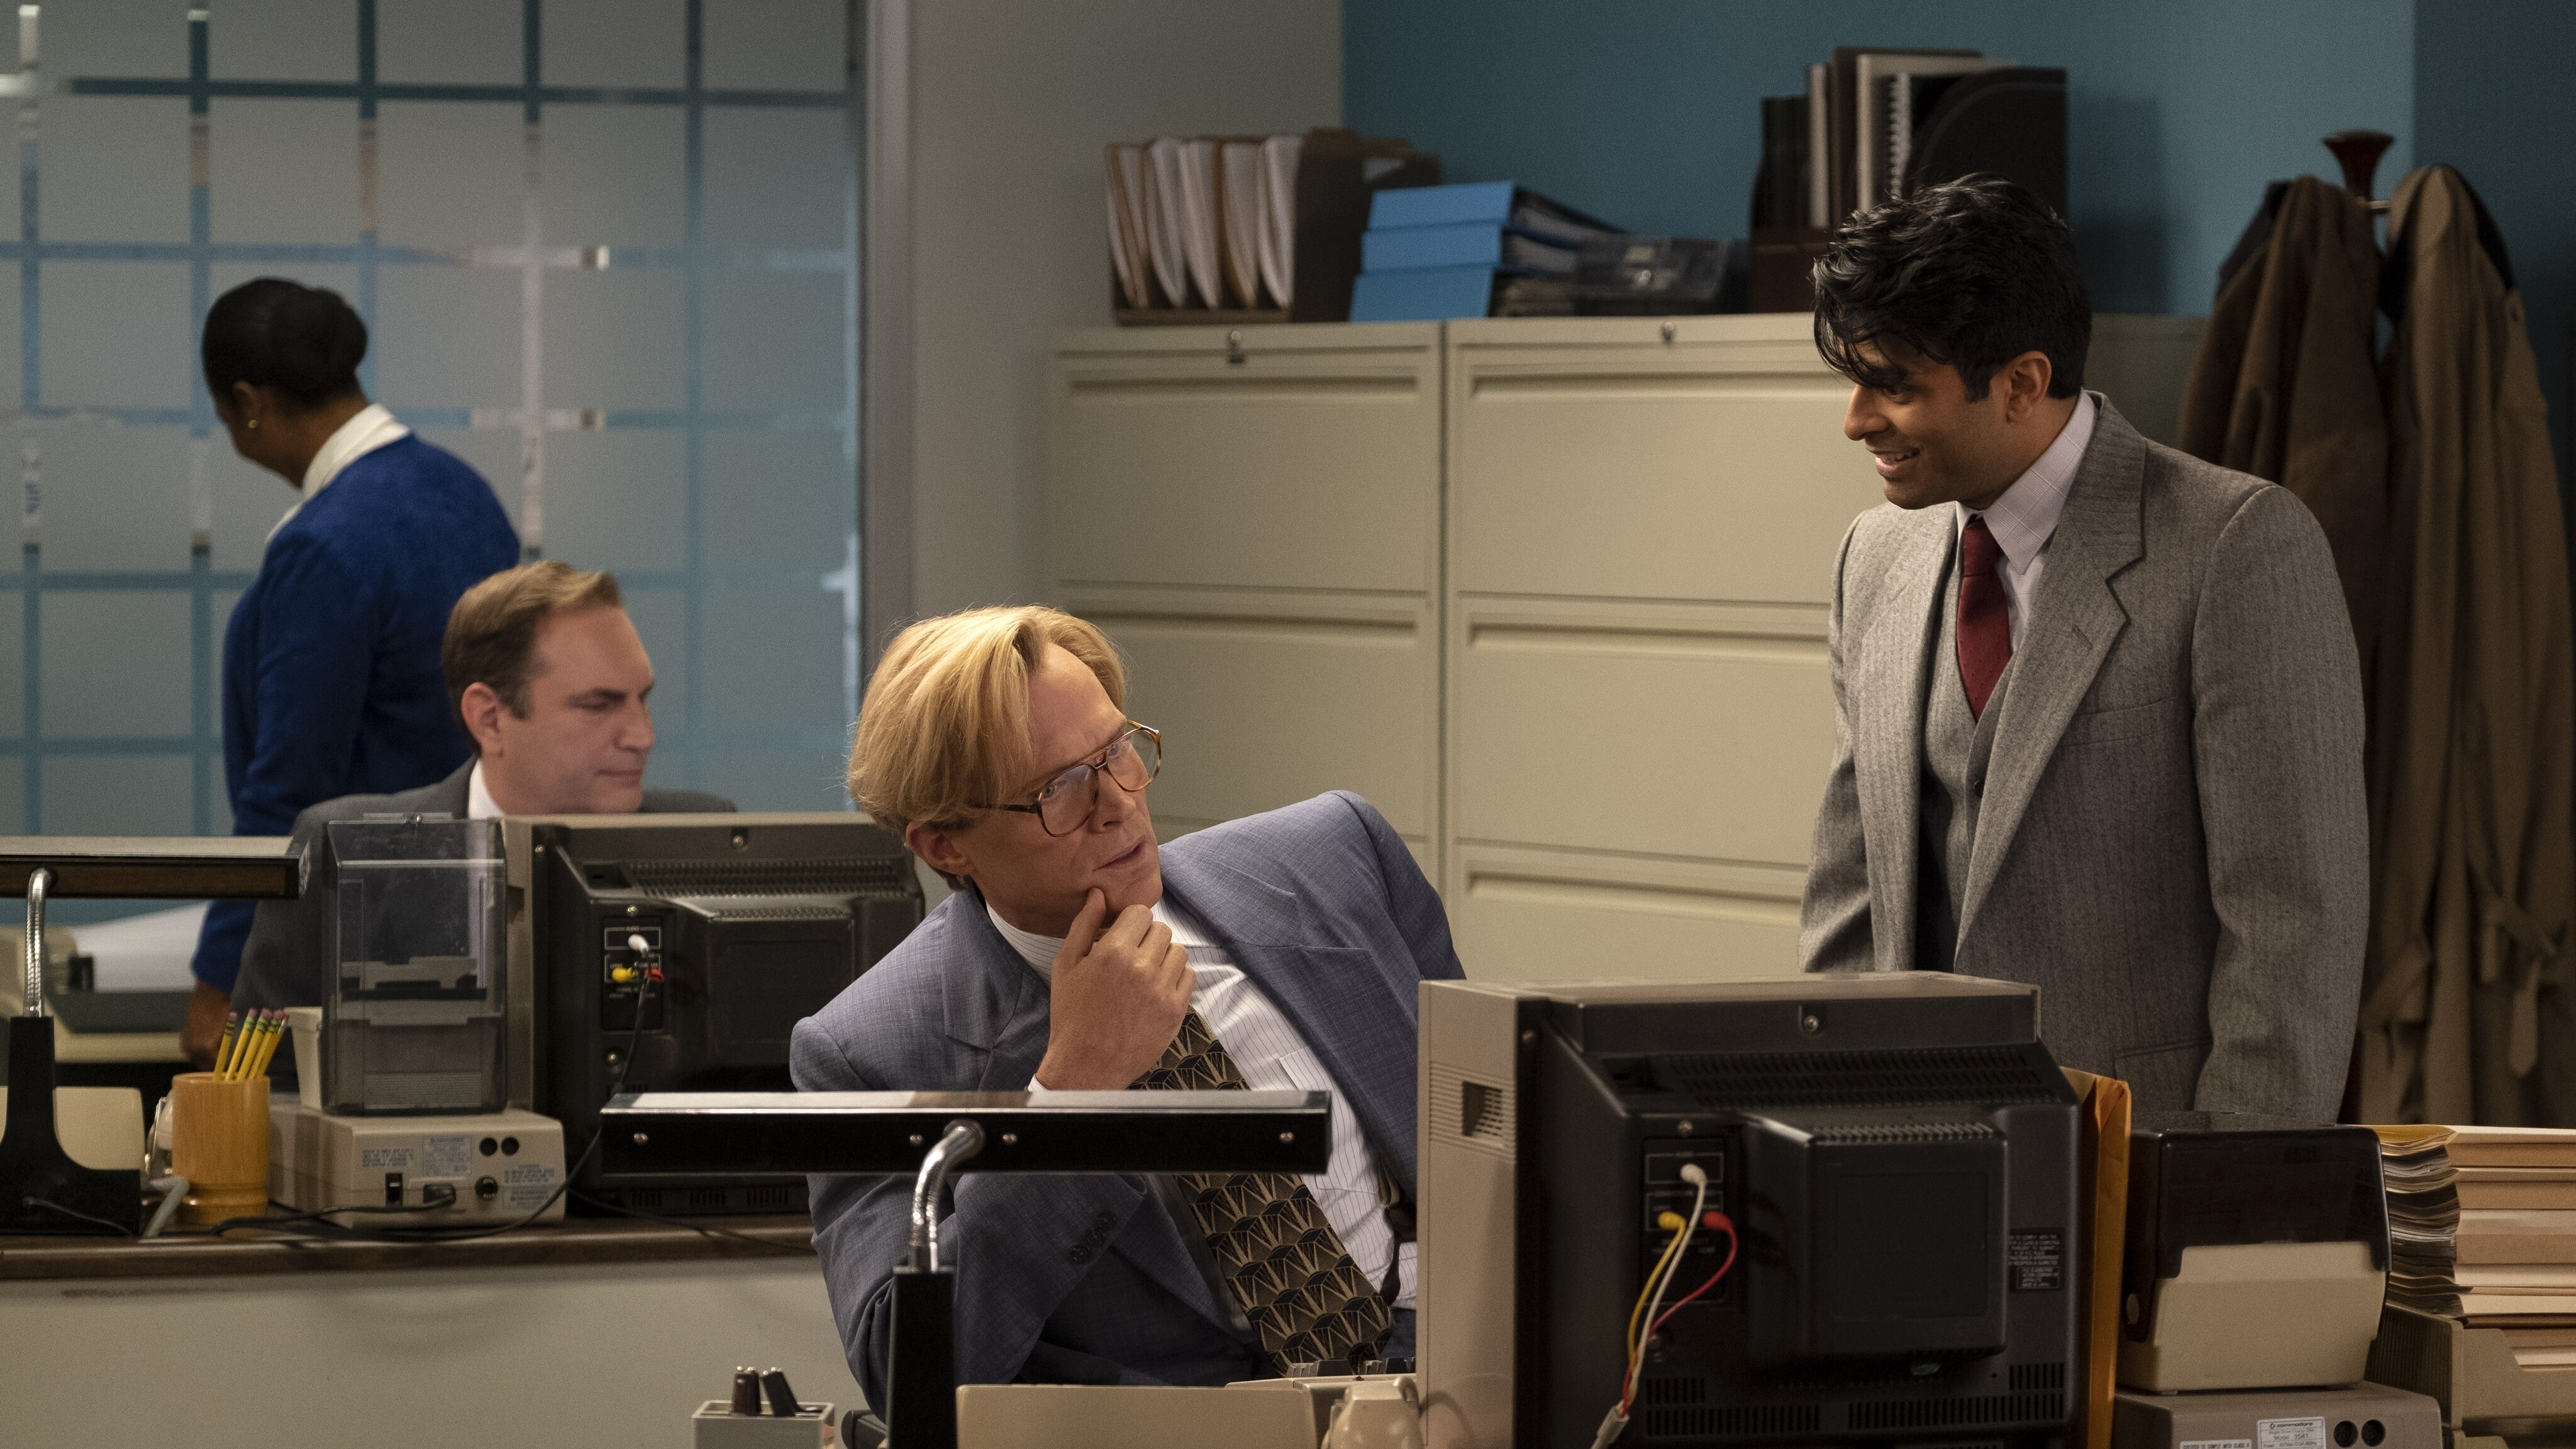 Paul Bettany as Vision and Asif Ali as Norm in Marvel Studios' WANDAVISION exclusively on Disney+. Photo by Chuck Zlotnick. ©Marvel Studios 2021. All Rights Reserved. 